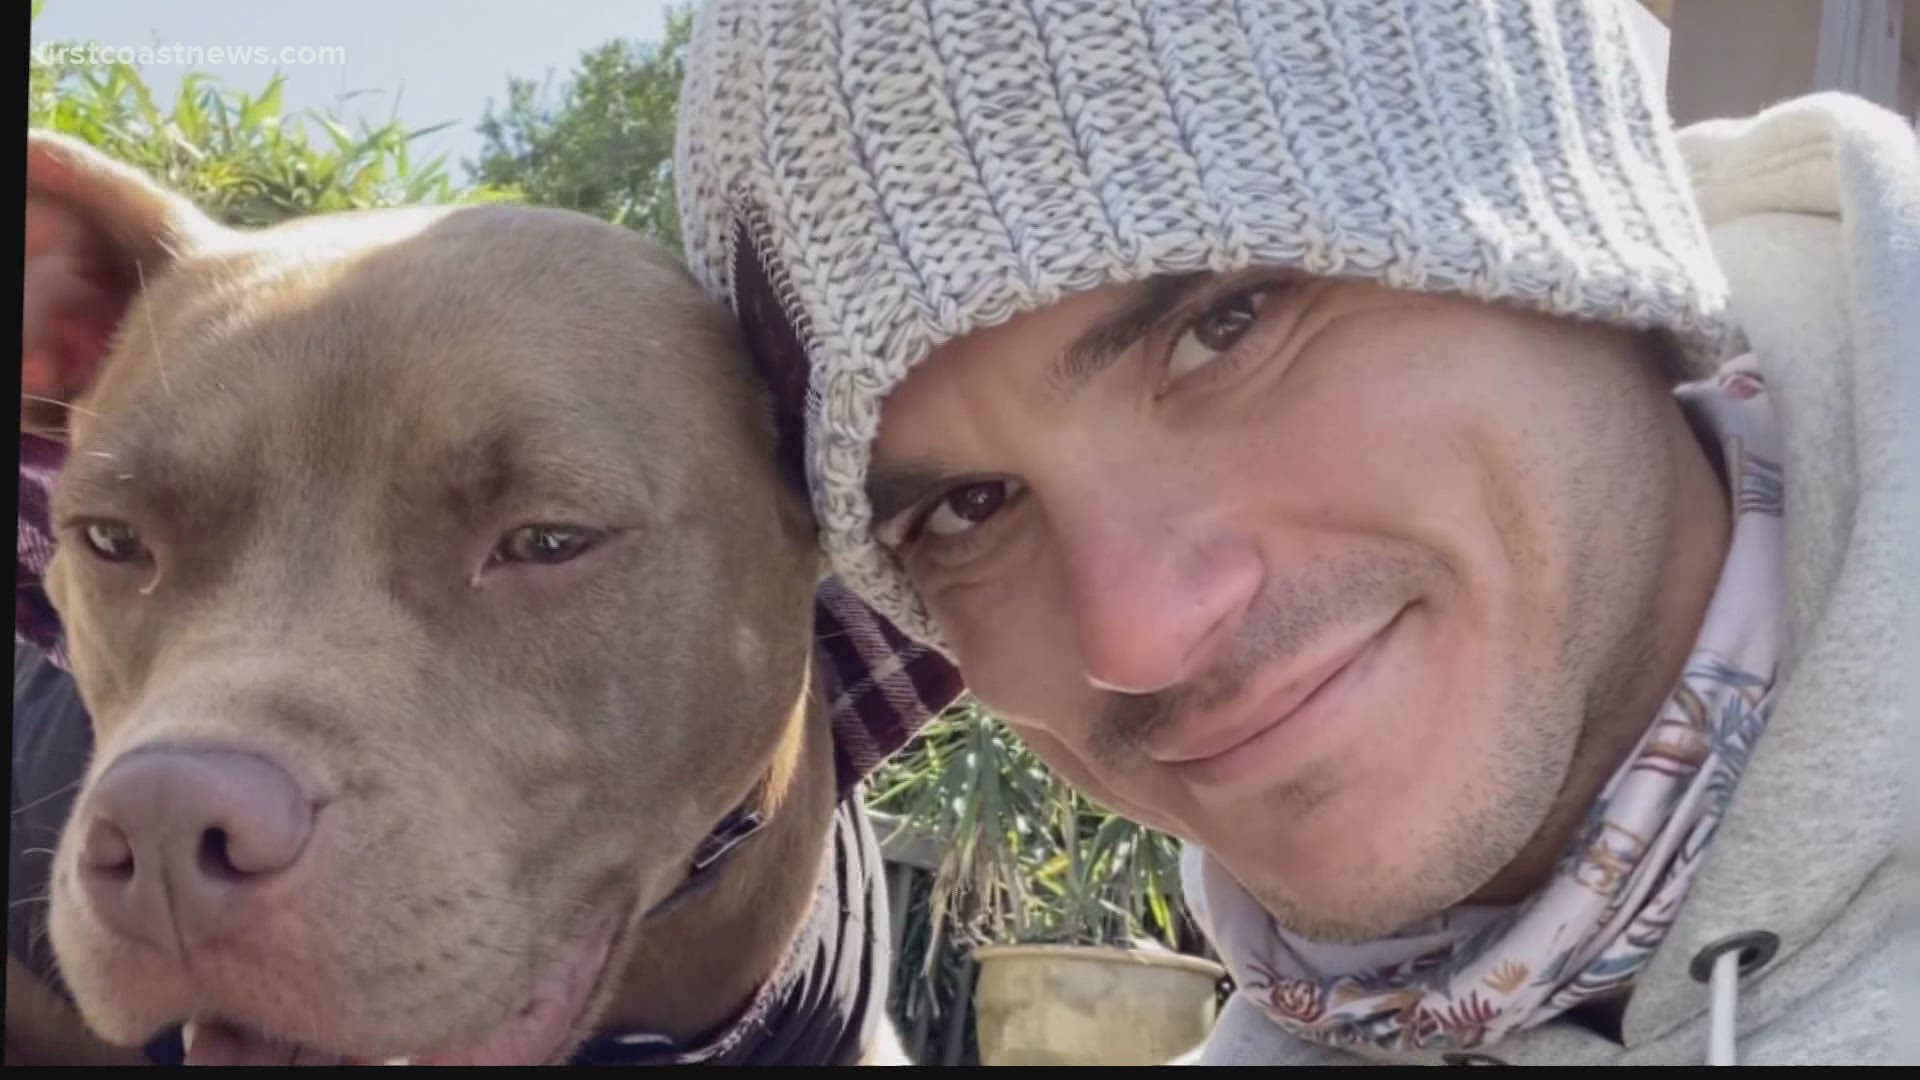 All month long, Josh Lambo is offering to pay half the adoption fee, plus pay for six months worth of dog food for any dog adopted from Fur Sisters.